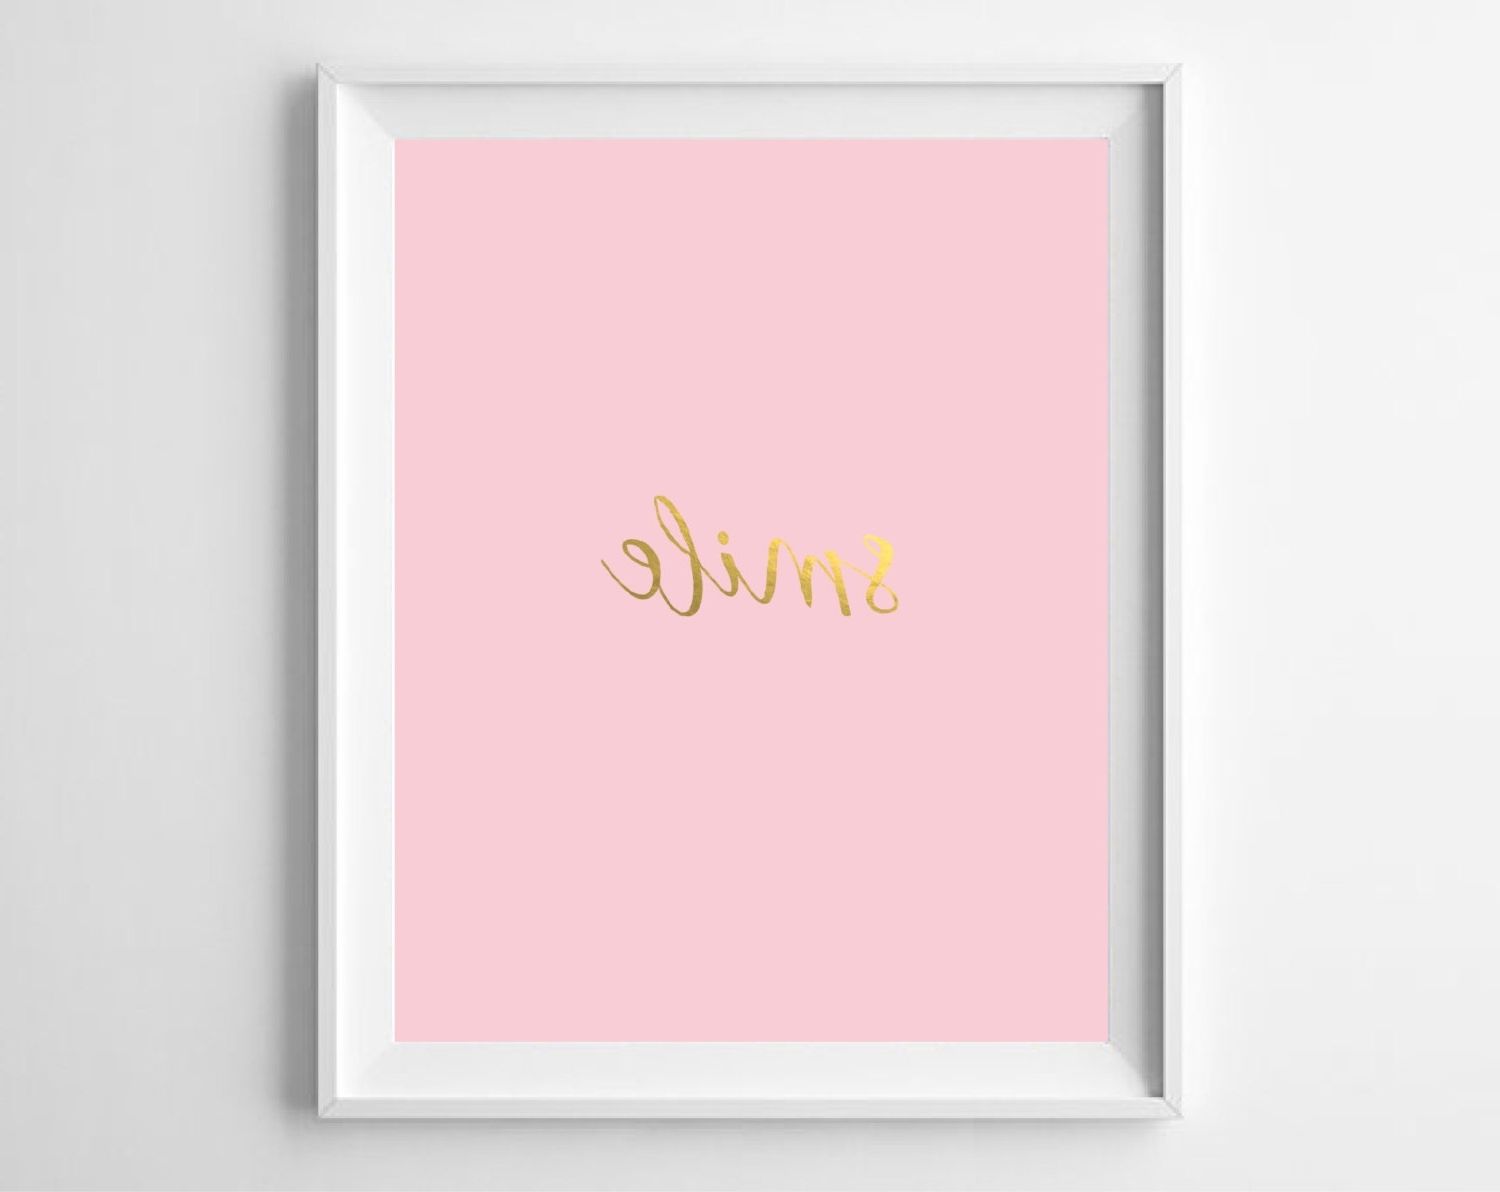 Etsy Throughout Pink Wall Art (View 8 of 15)